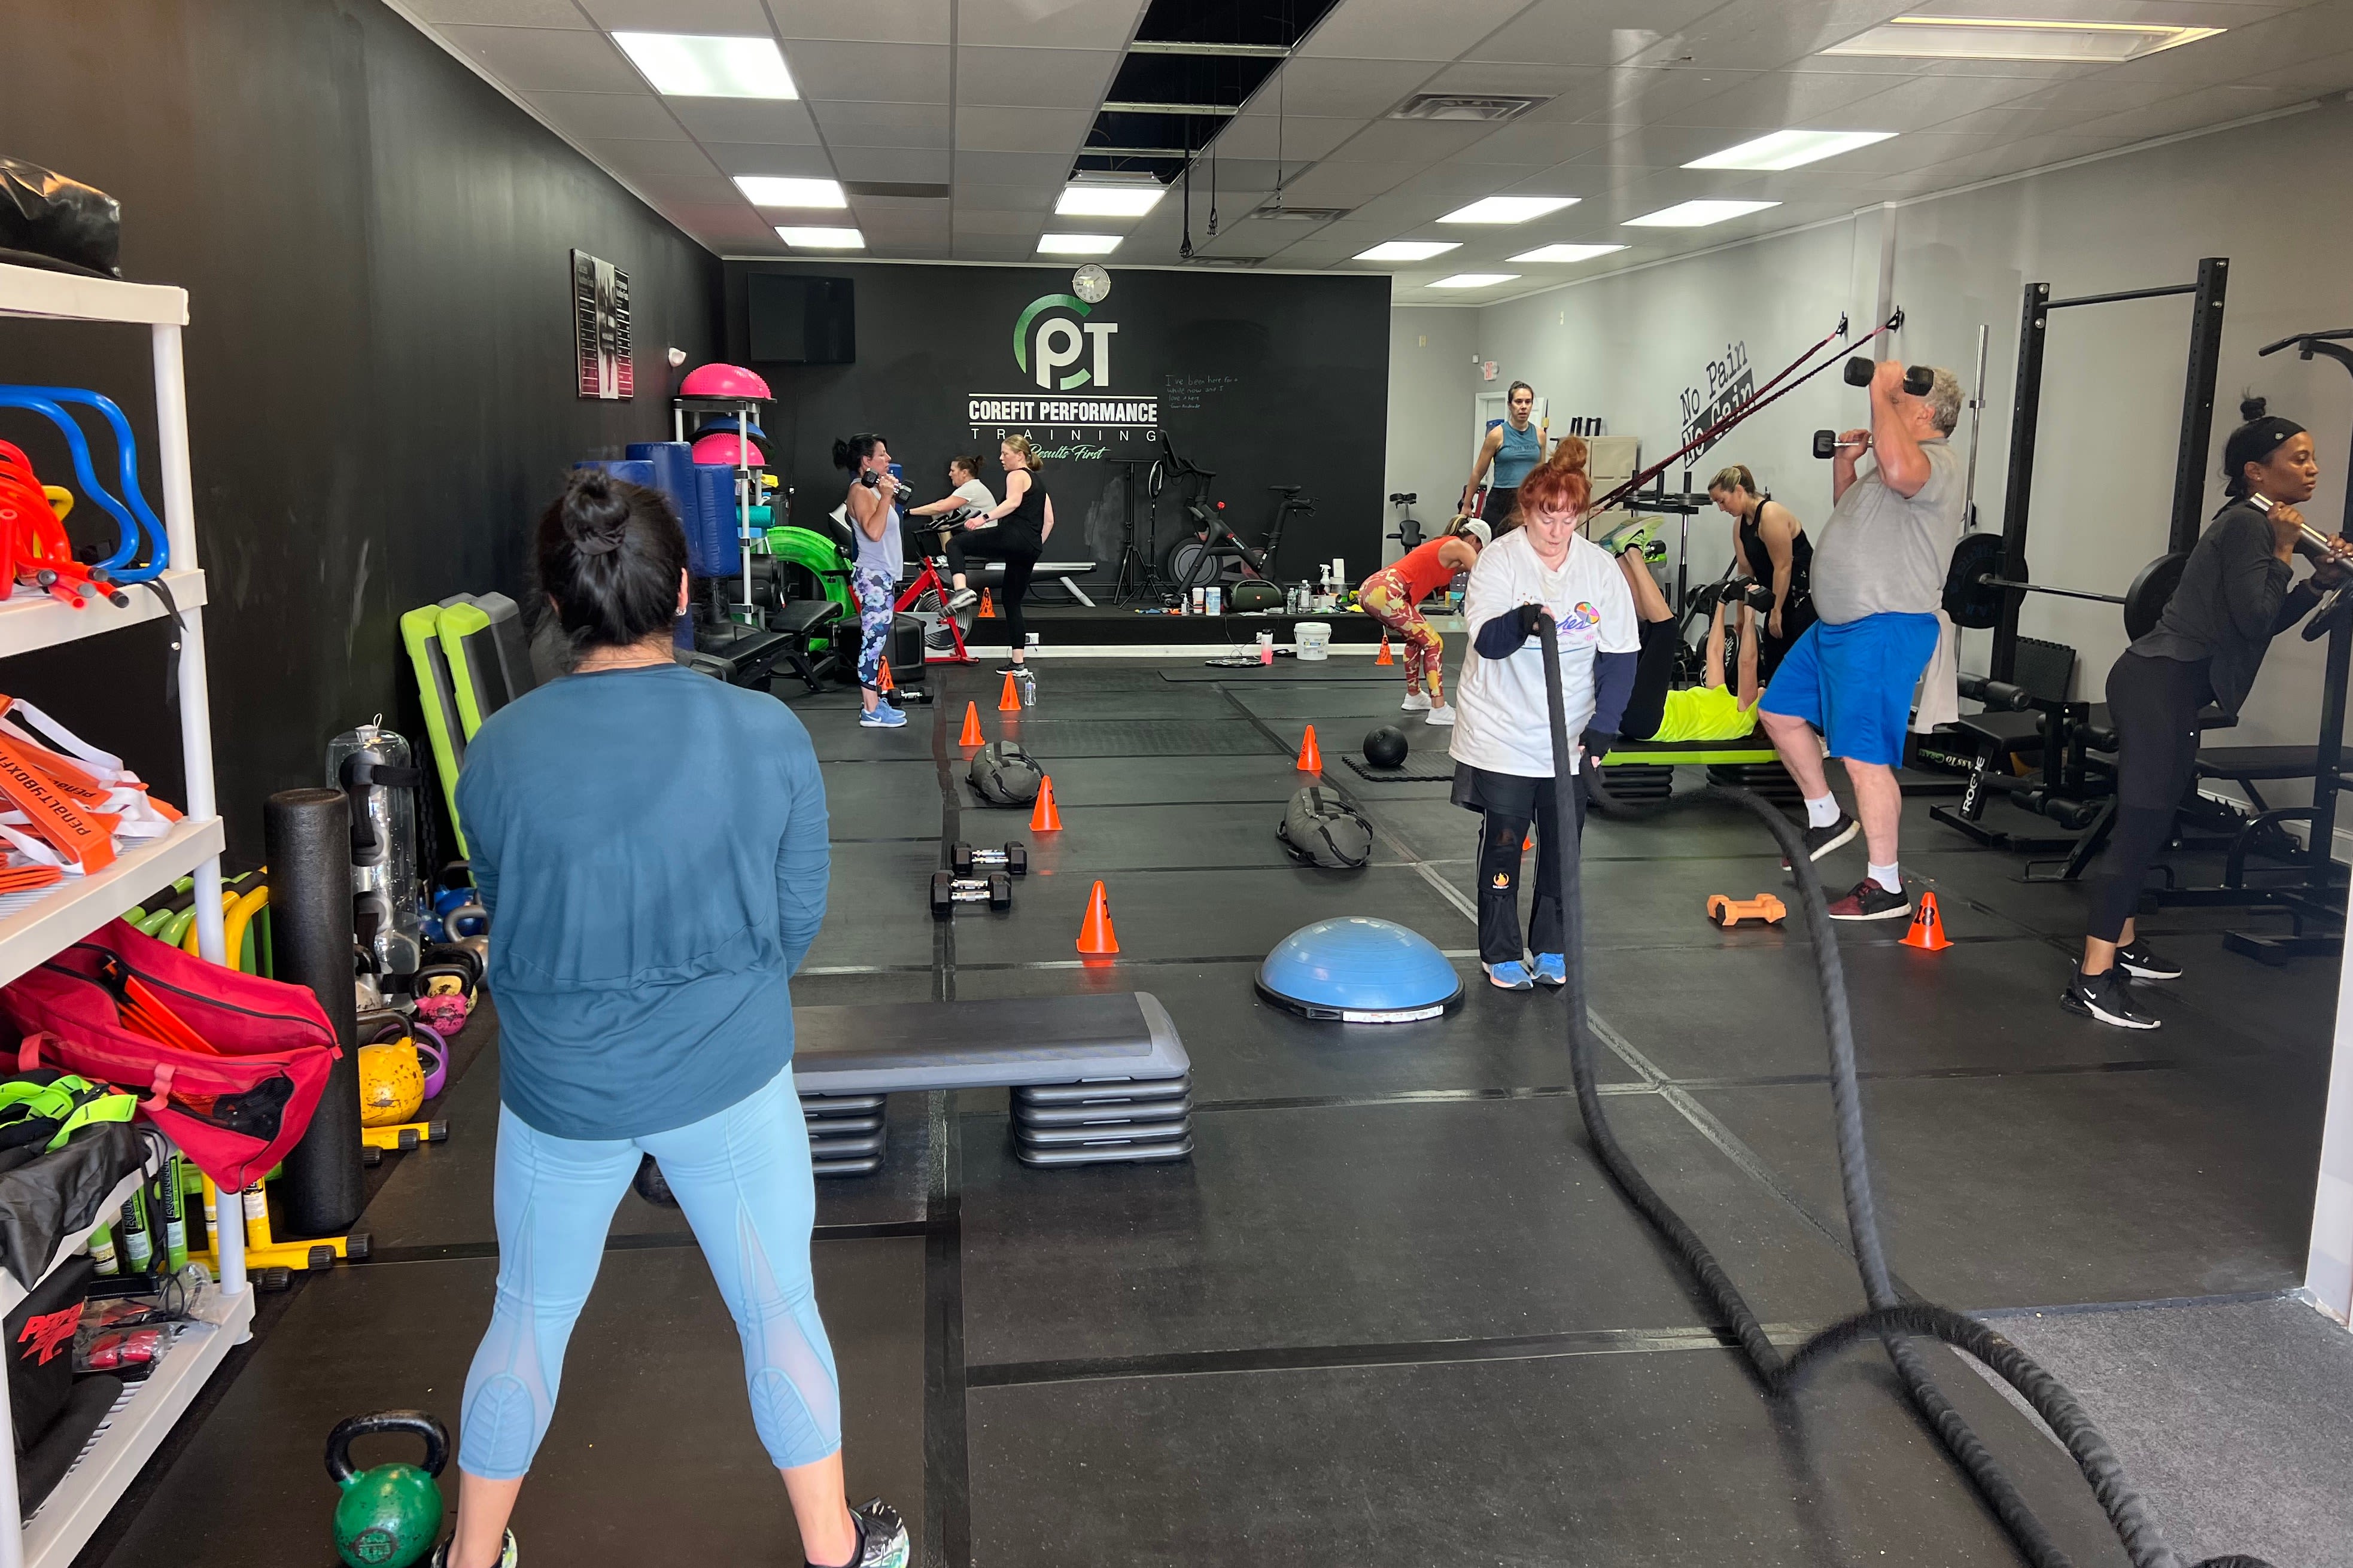 CoreFit Performance Training: Read Reviews and Book Classes on